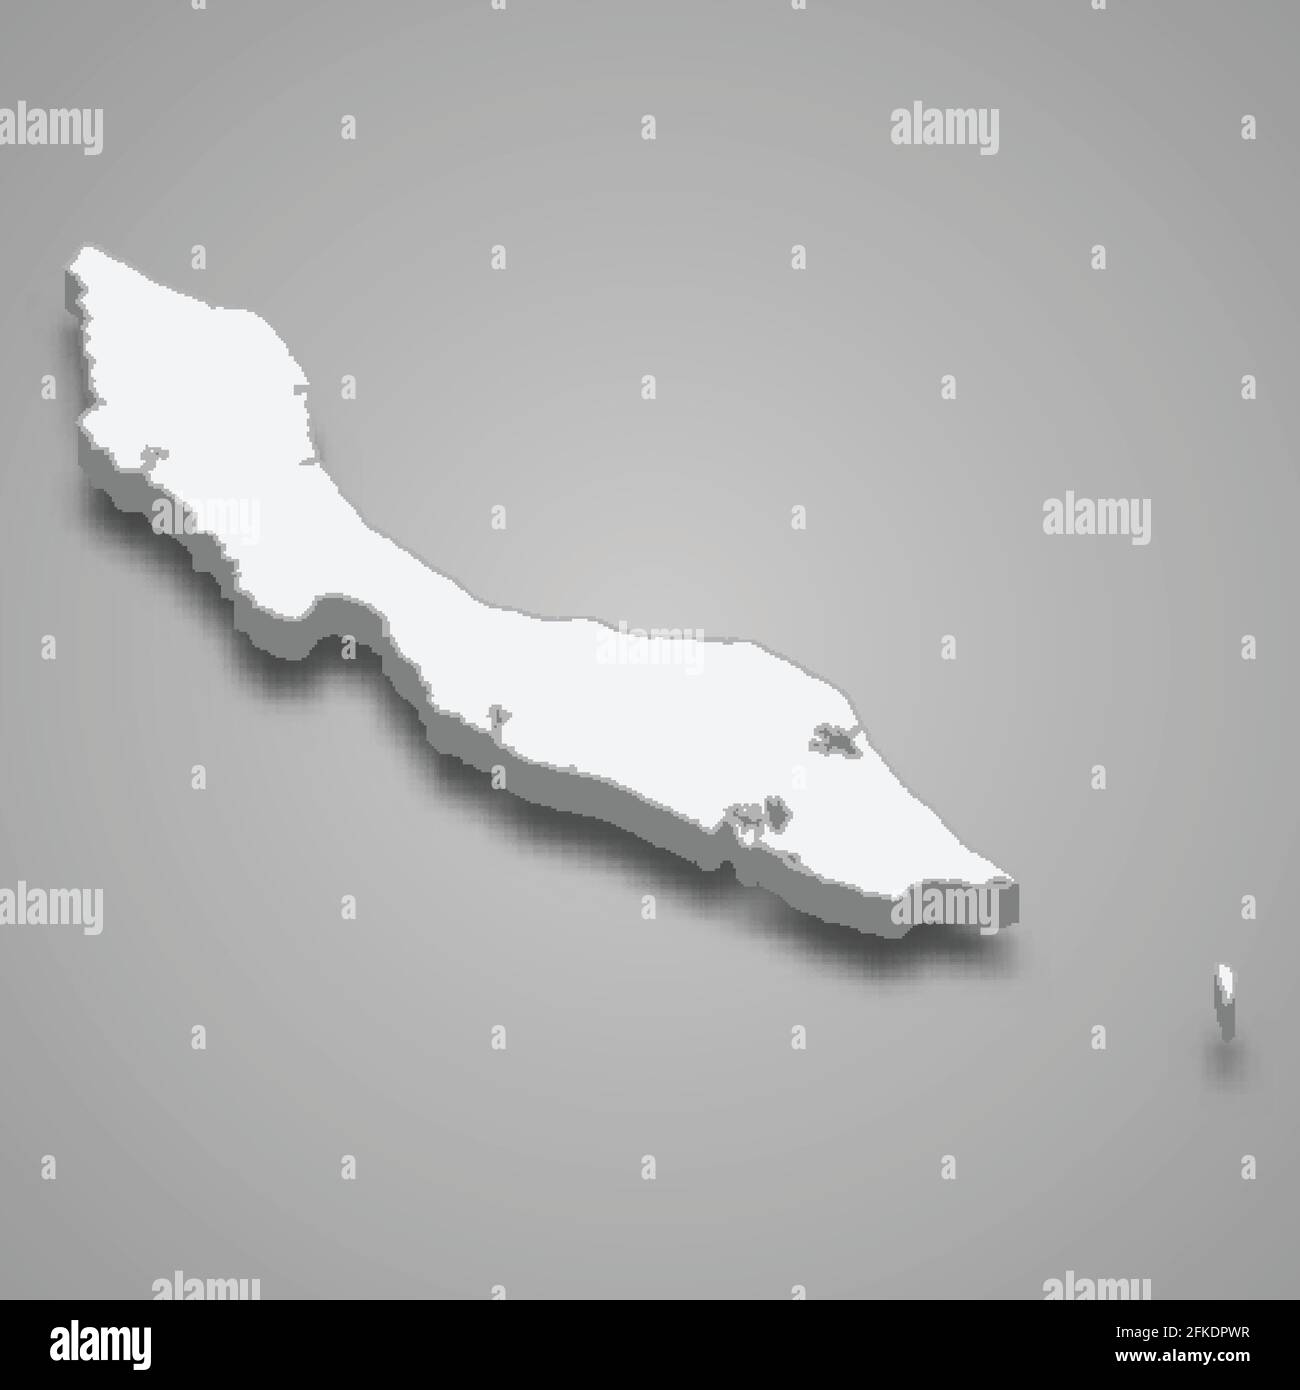 3d isometric map of Curacao, isolated with shadow vector illustration Stock Vector